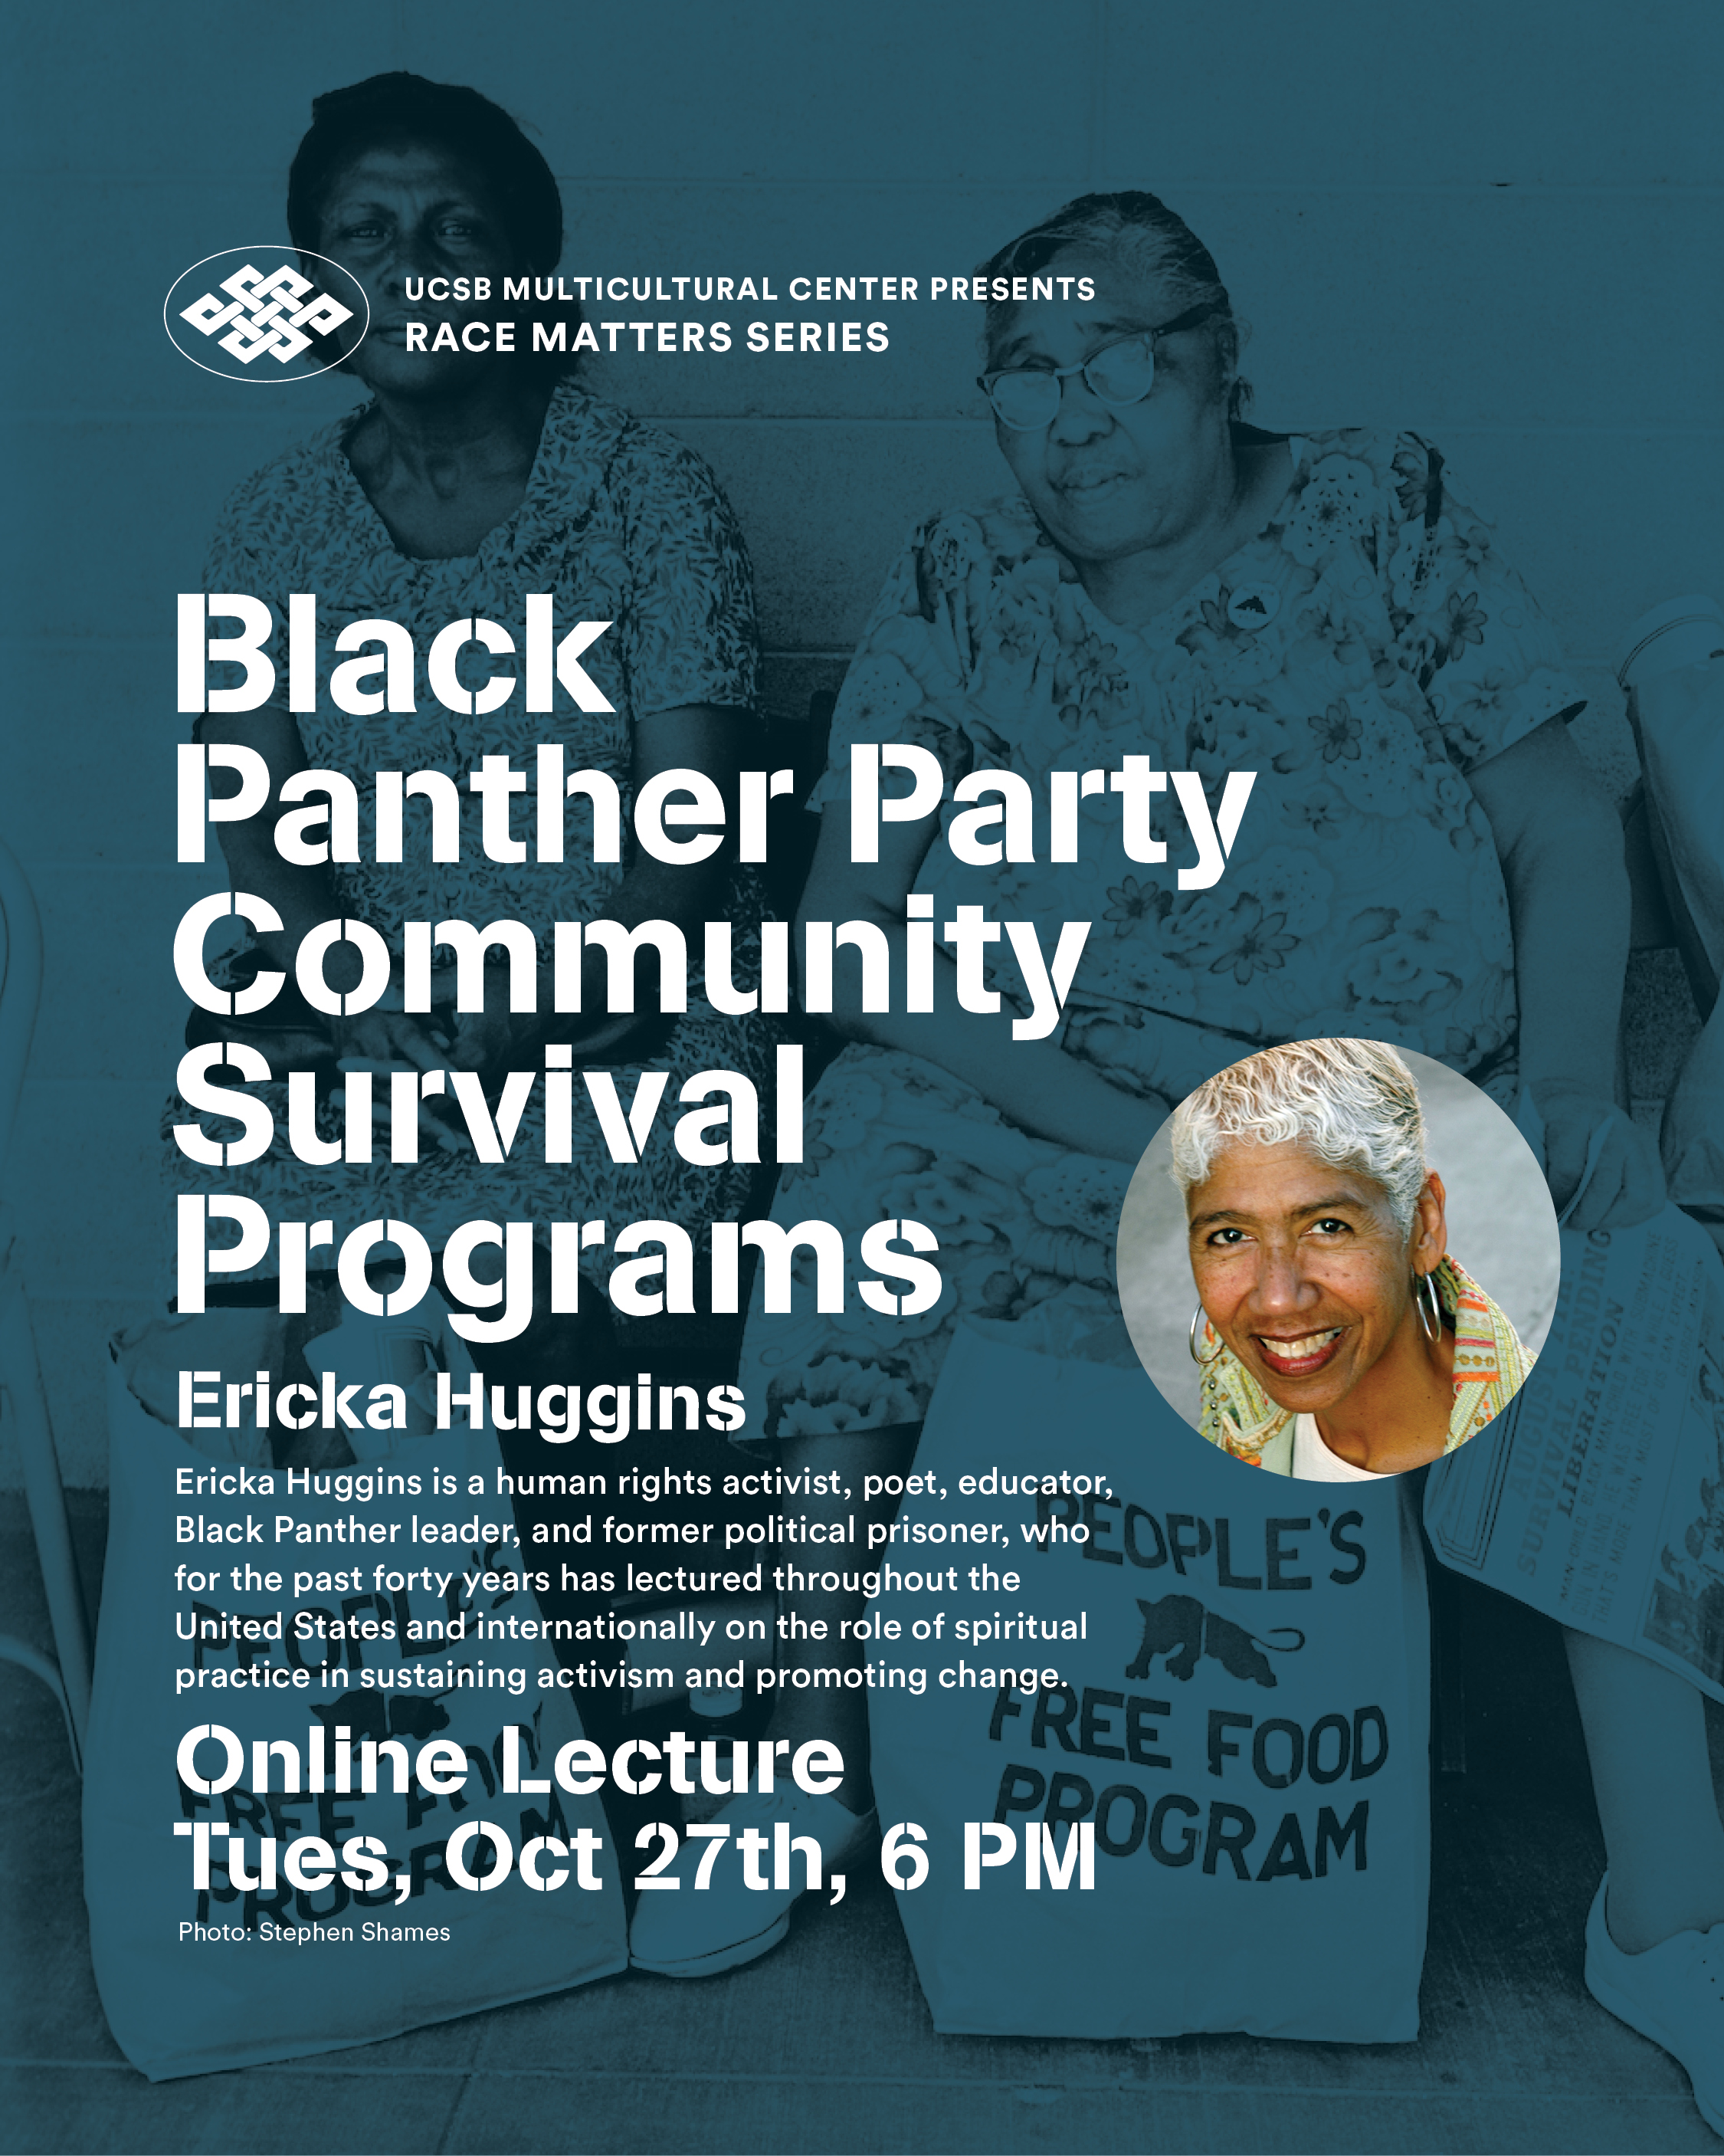 Black Panther Party Community Survival Programs with Ericka Huggins